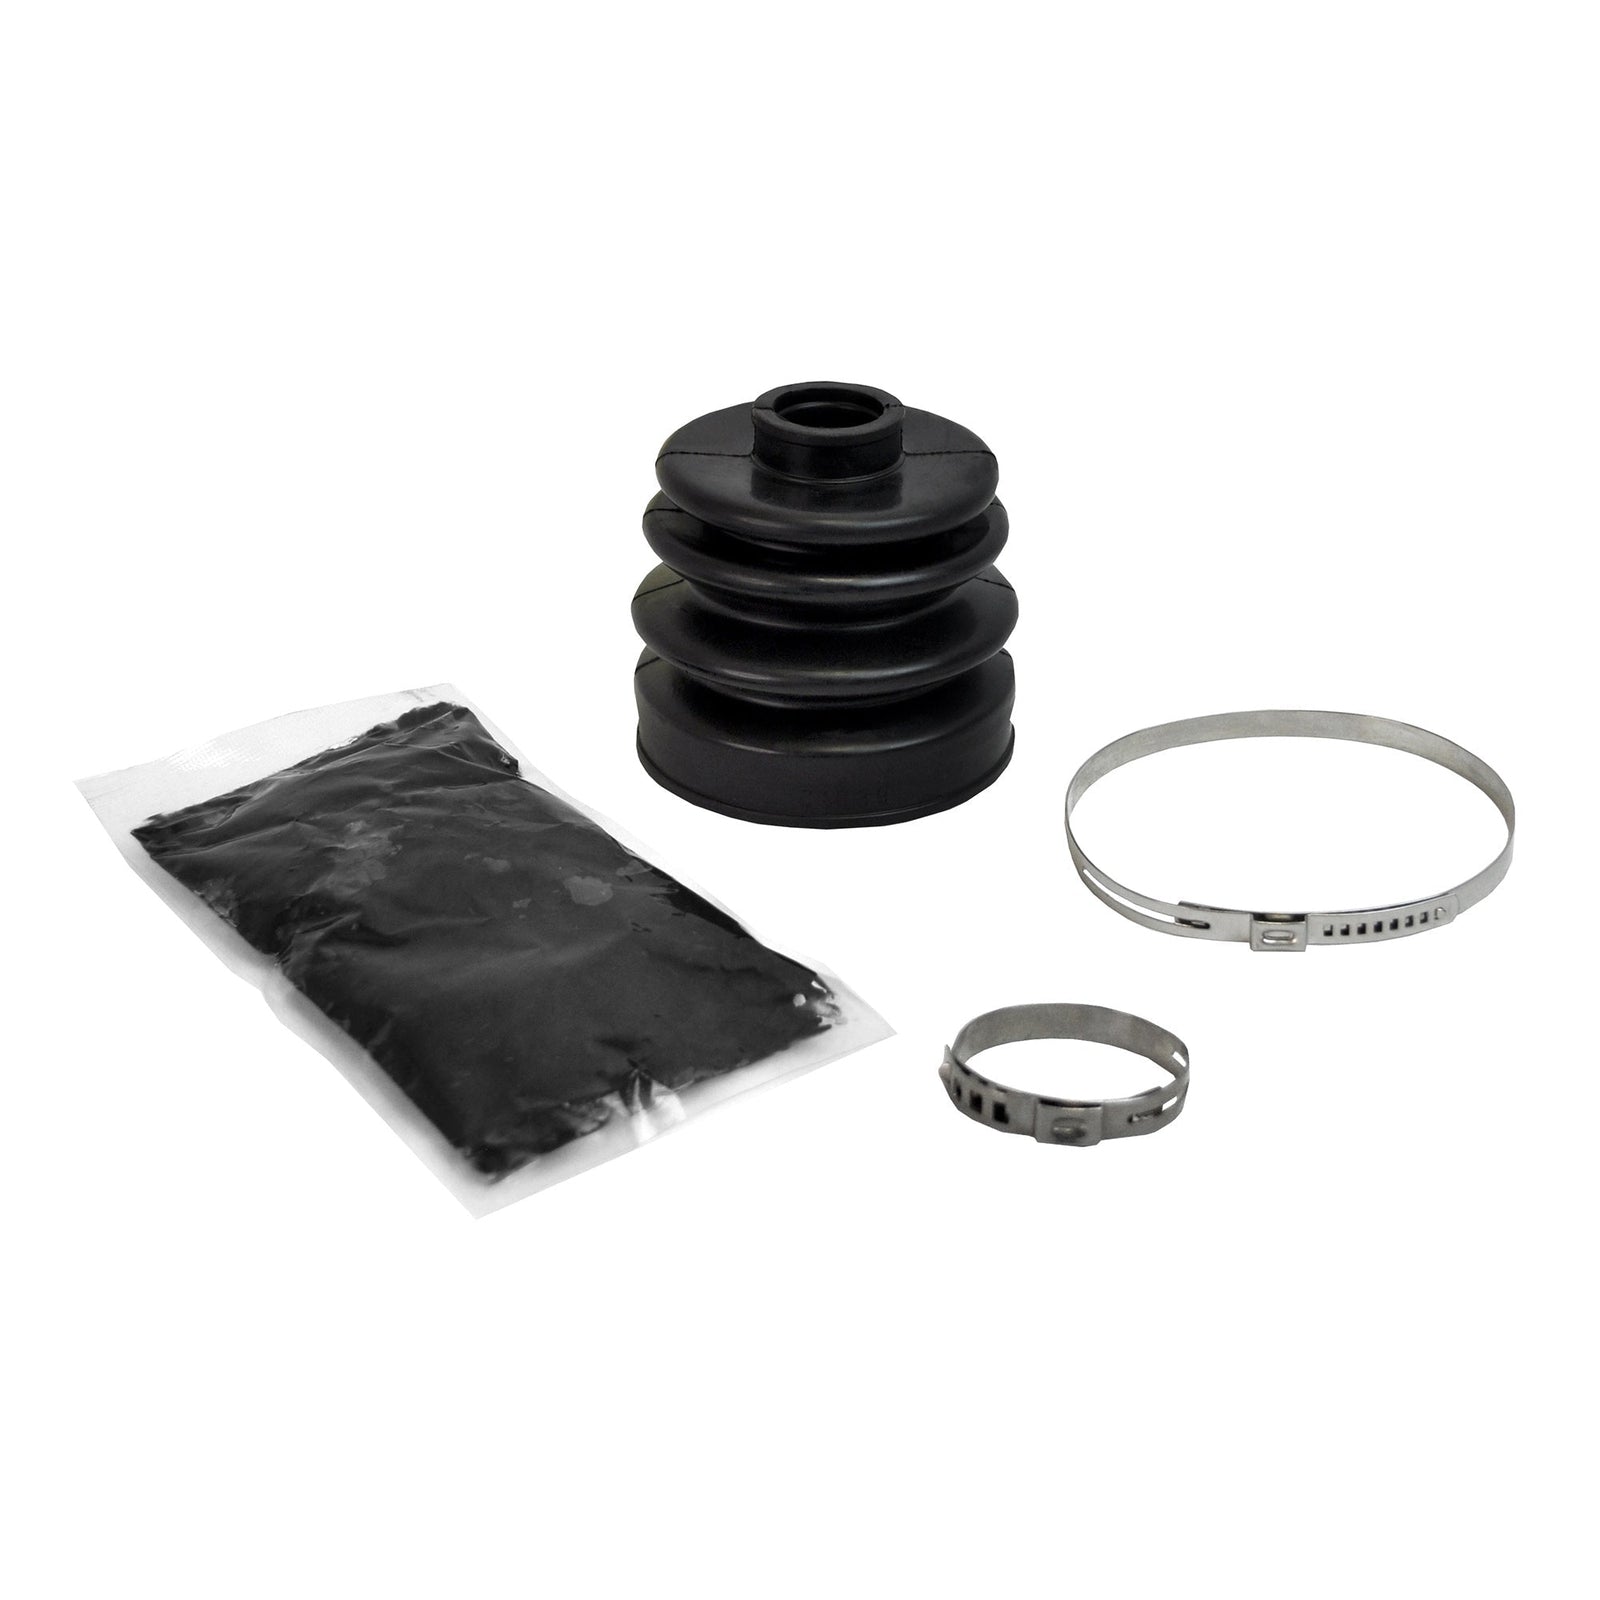 Arctic Cat VLX 700 Rugged OE Replacement Boot Kit